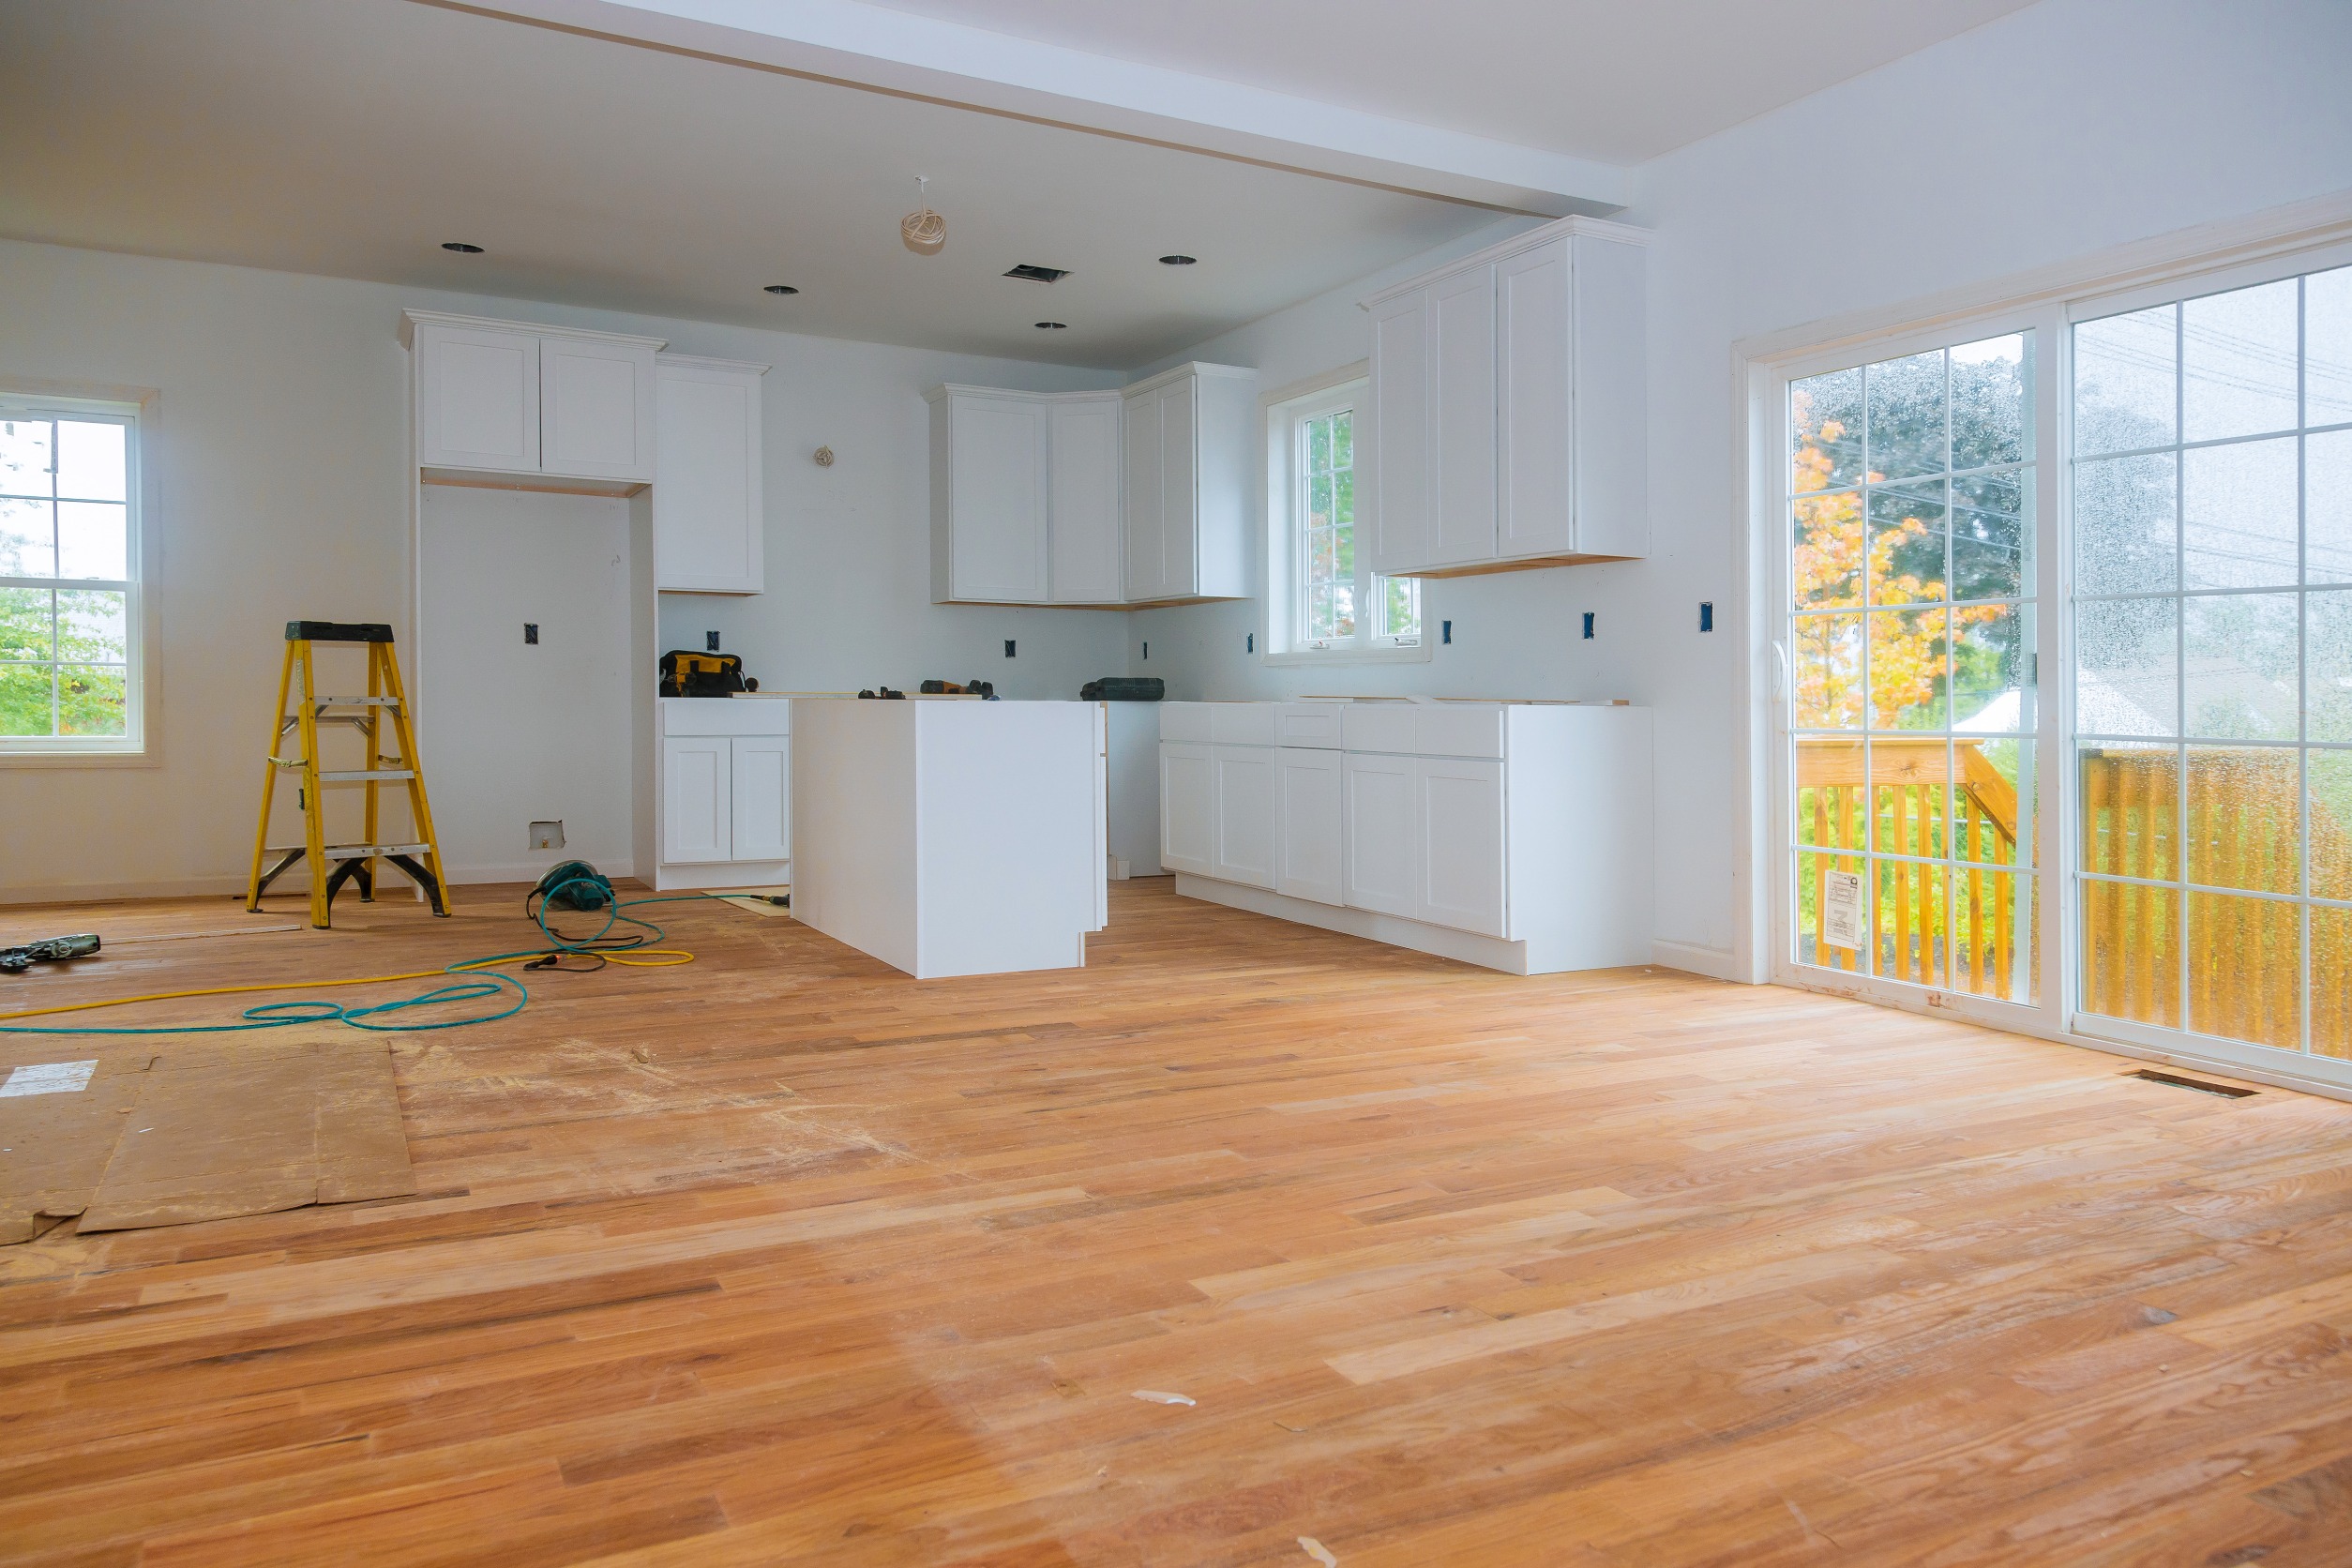 8 Tips To Follow When Considering Home Remodeling!